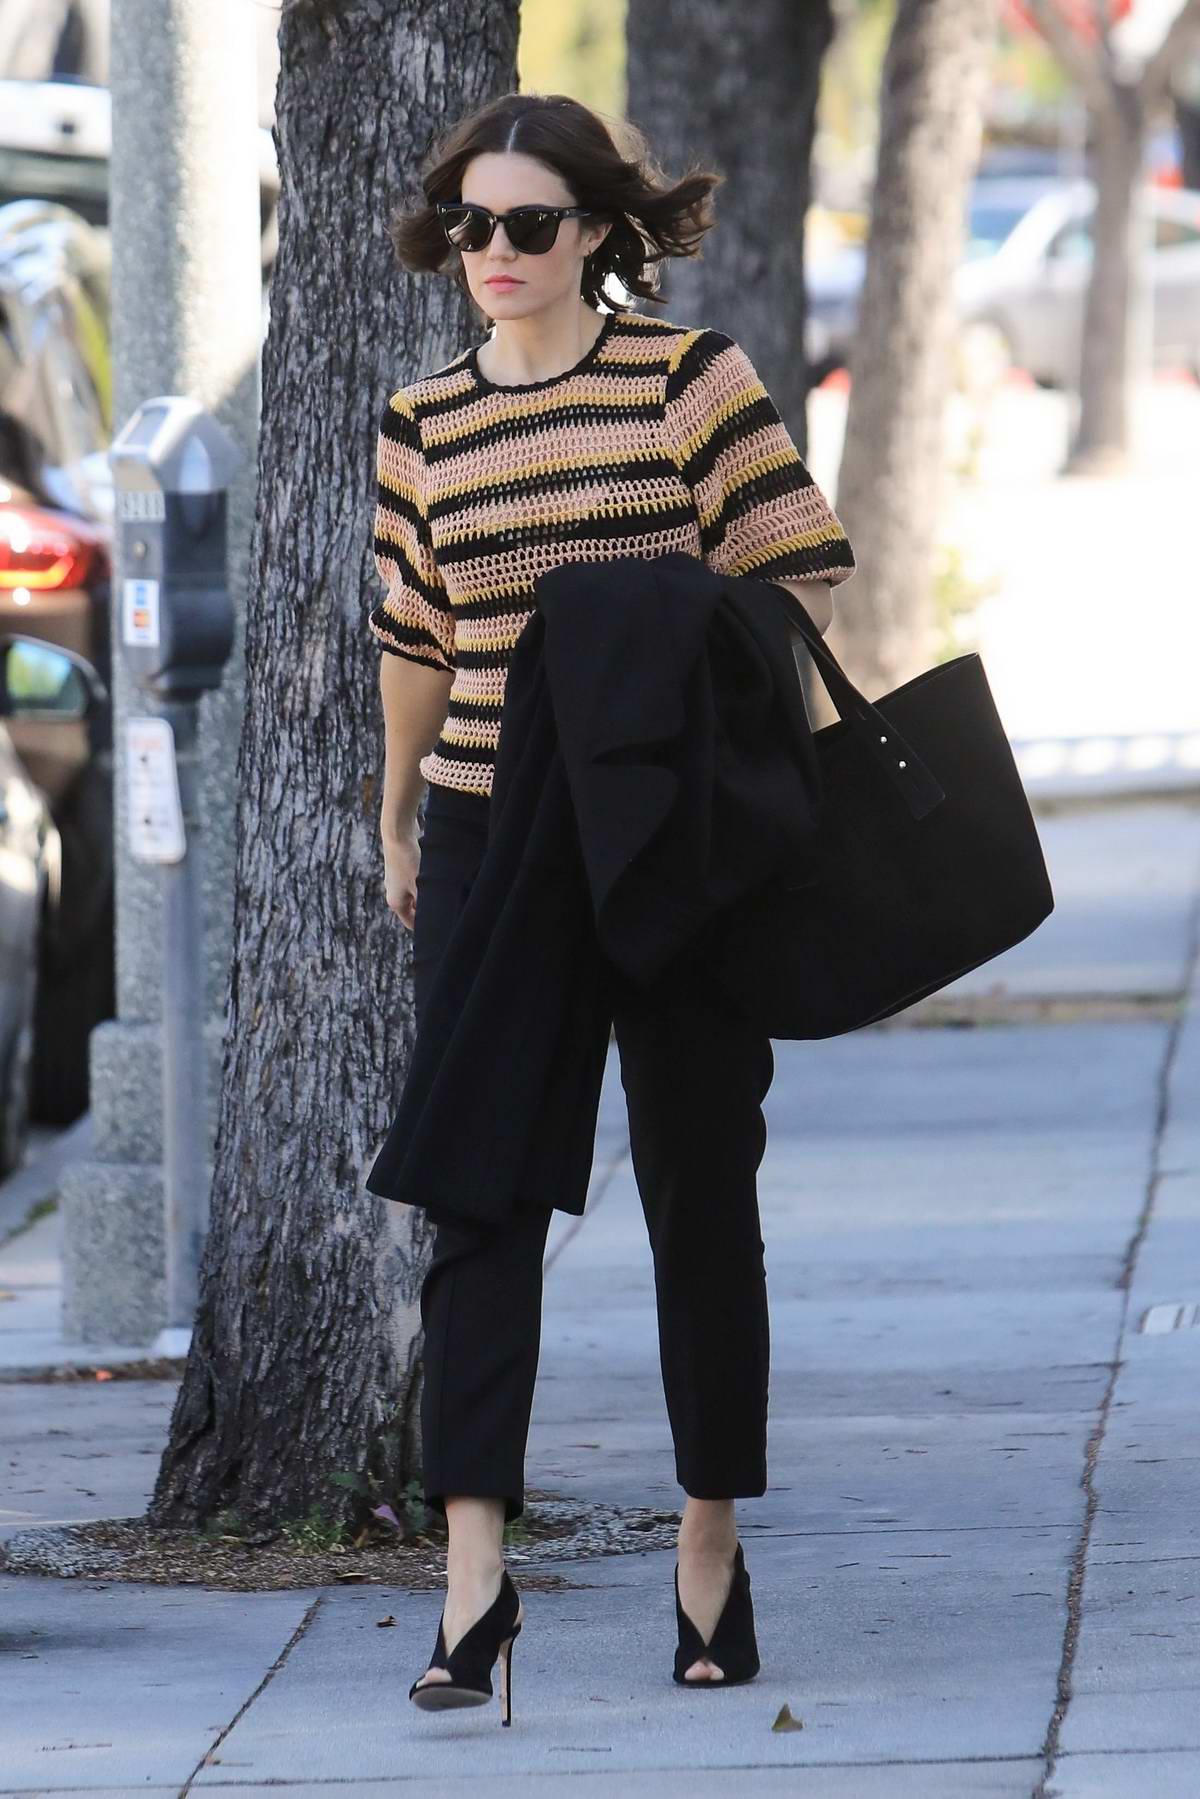 mandy moore steps out in a striped knitted sweater and black trousers ...